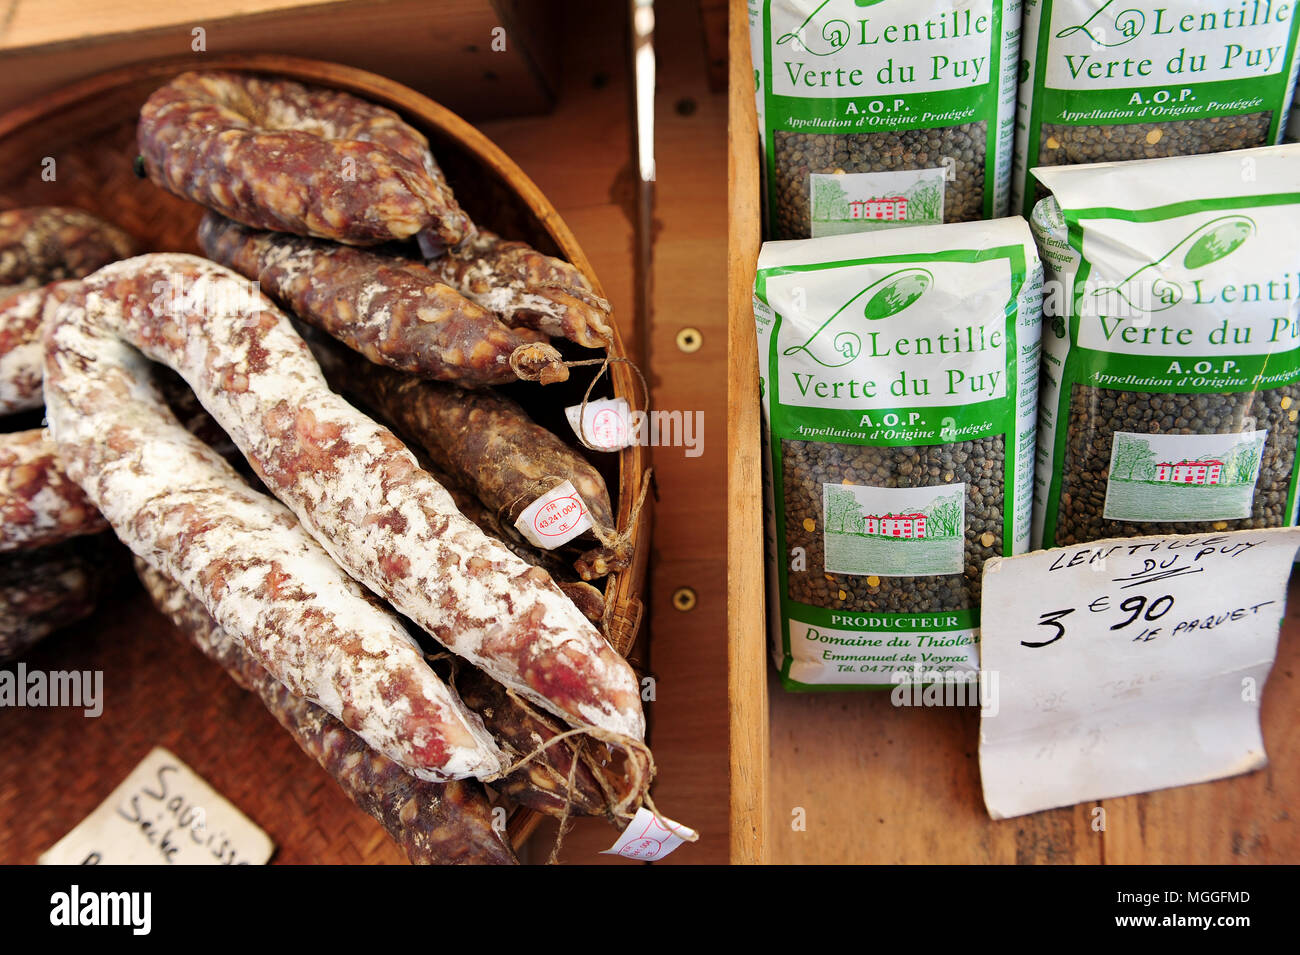 Bags of Le Puy green lentils next to some locally-produced sausages at the local fruit and veg market in the city of Le-Puy-en-Velay, France Stock Photo